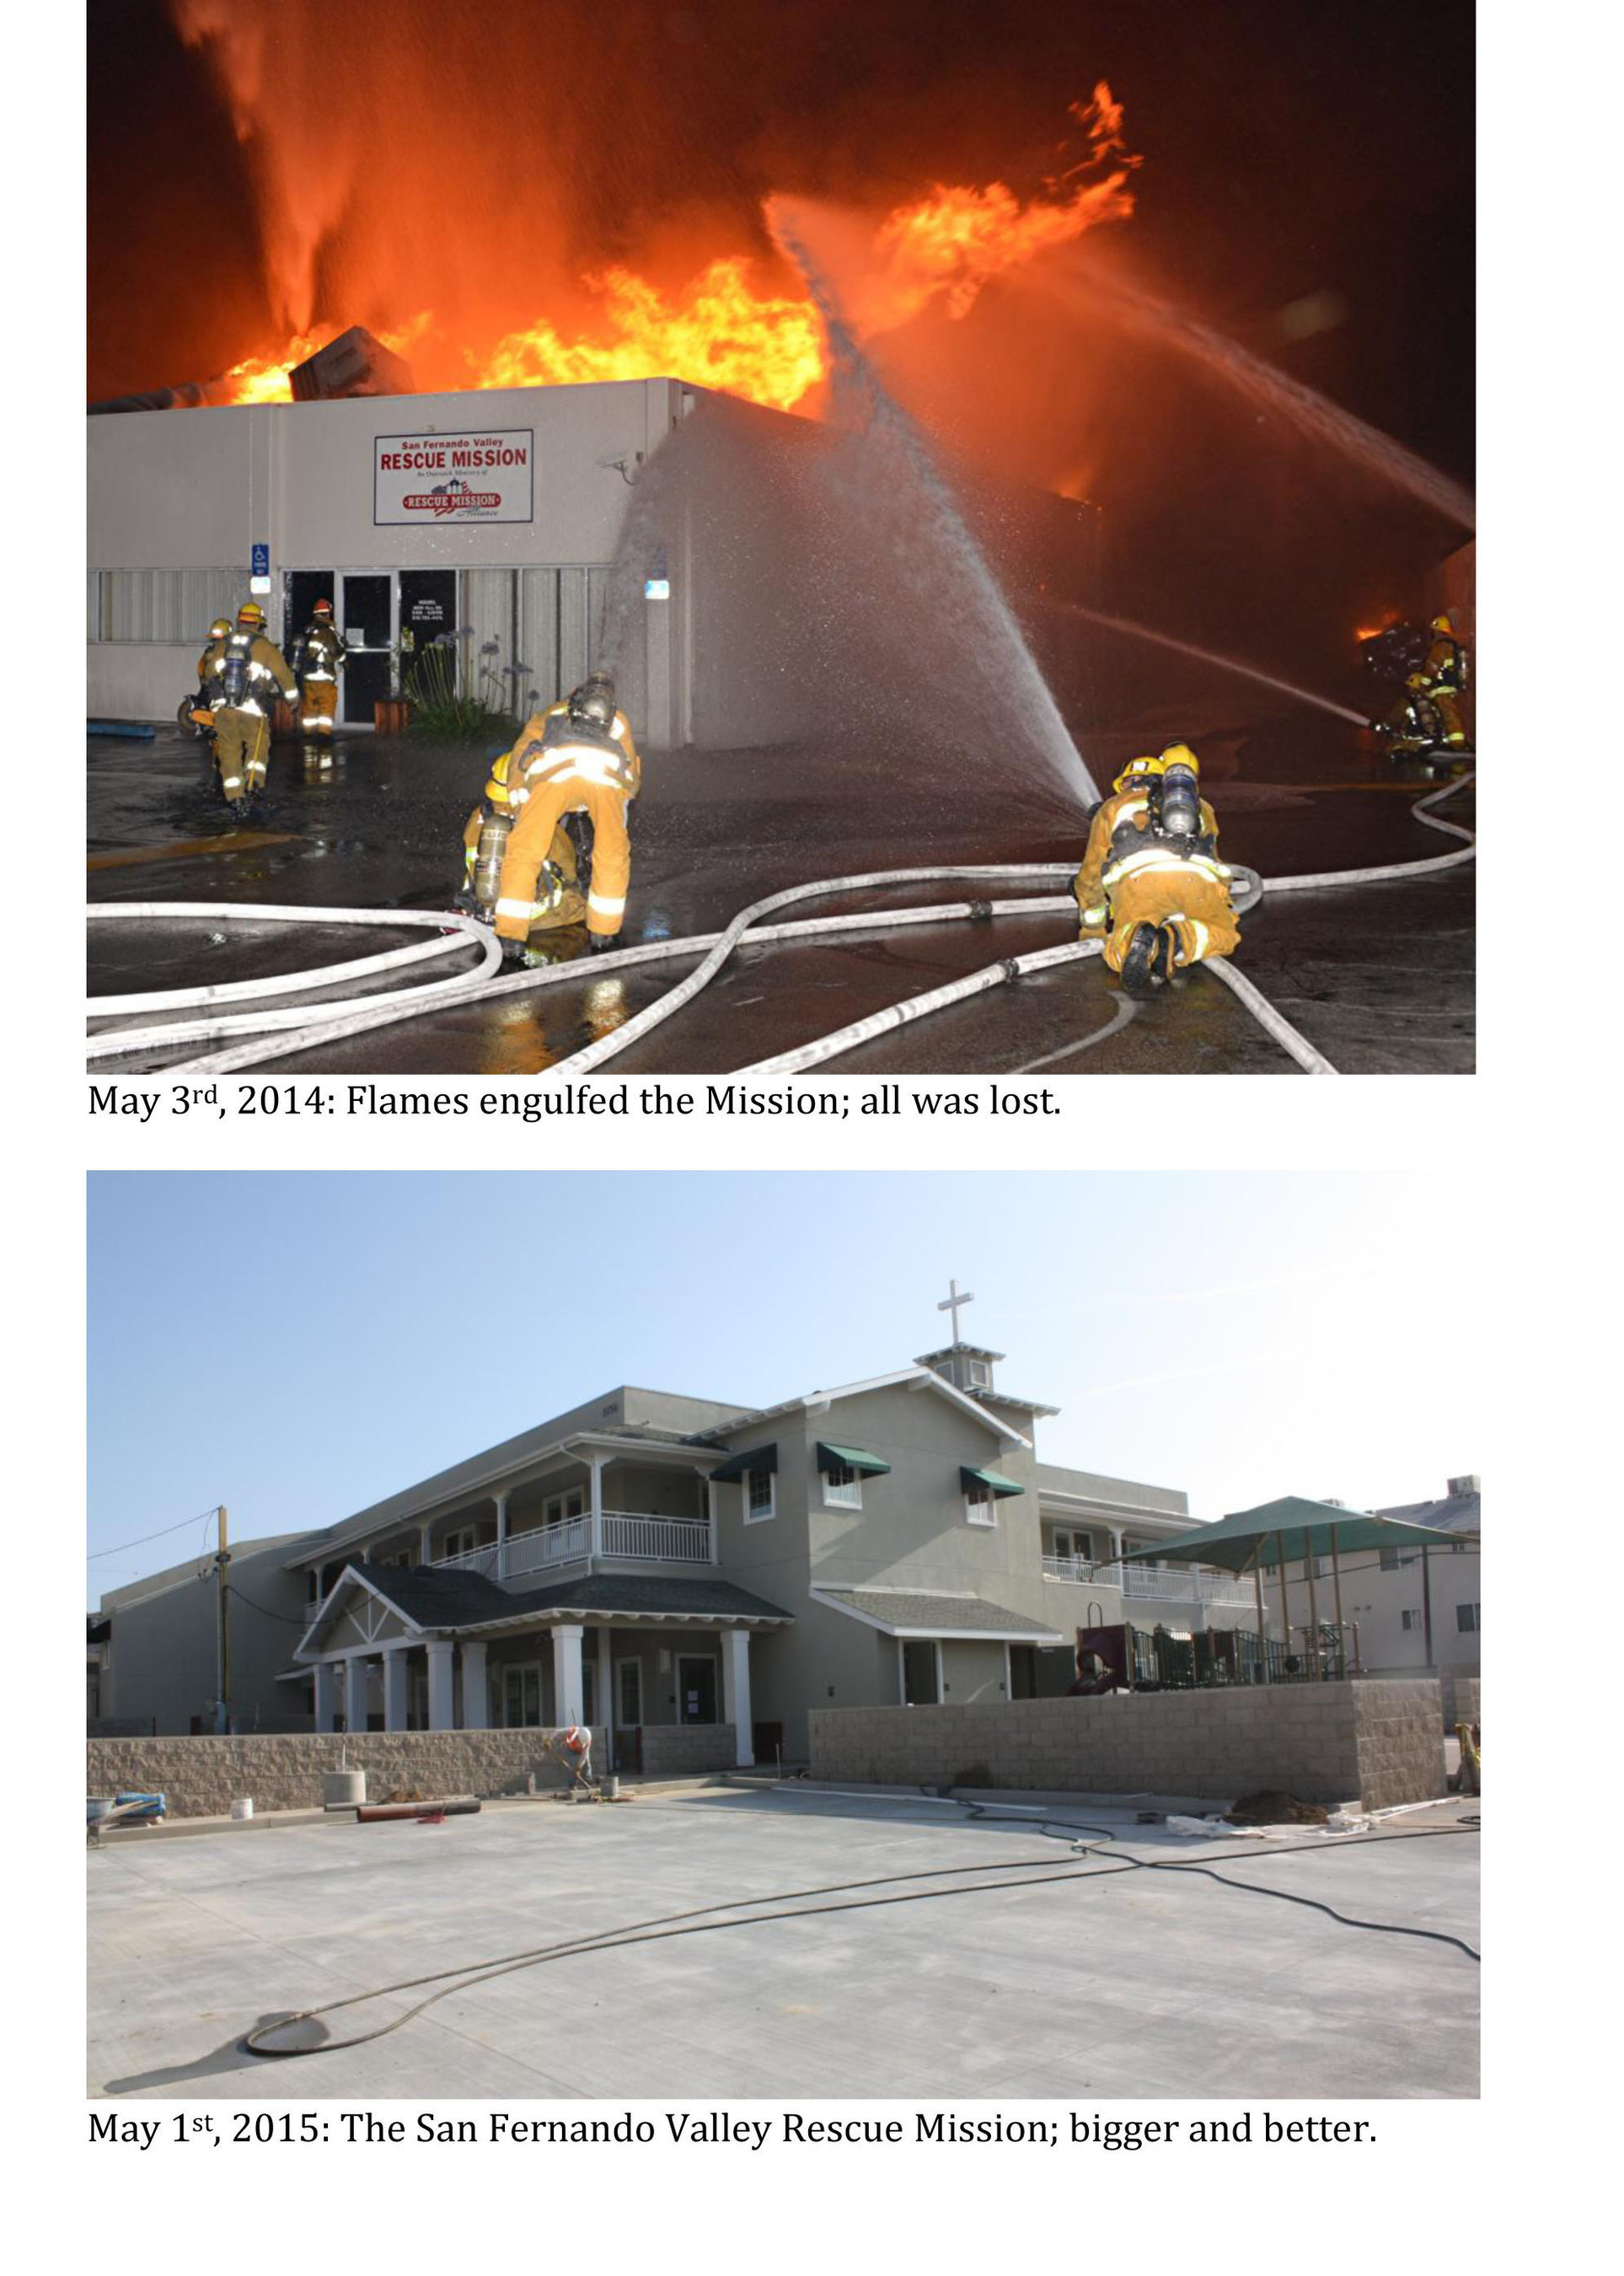 May 3rd, 2014: Flames engulfed the Mission; all was lost. May 1st, 2015: The San Fernando Valley Rescue Mission; bigger and better.